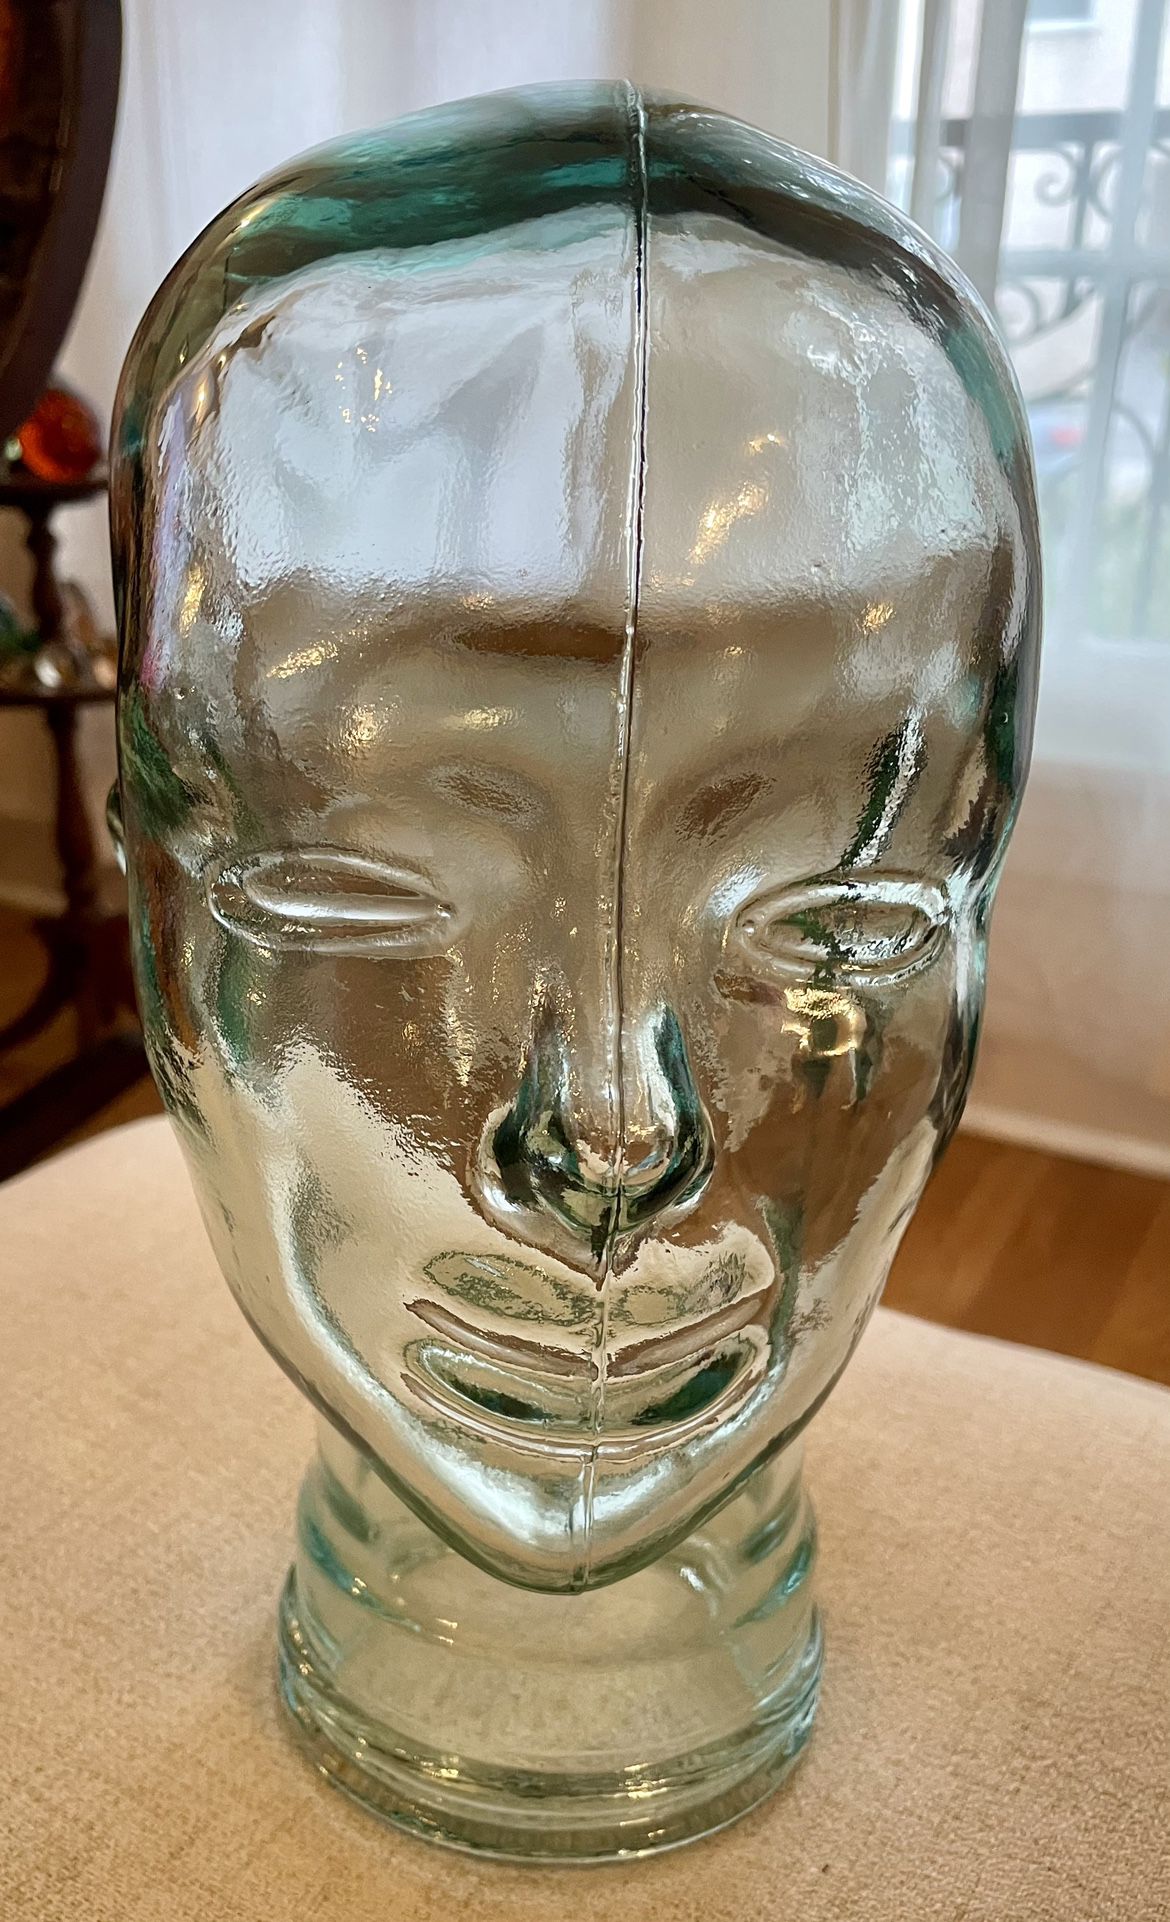 Vintage Glass Human Head Statue - Green Tint - 10”H. Made In Spain